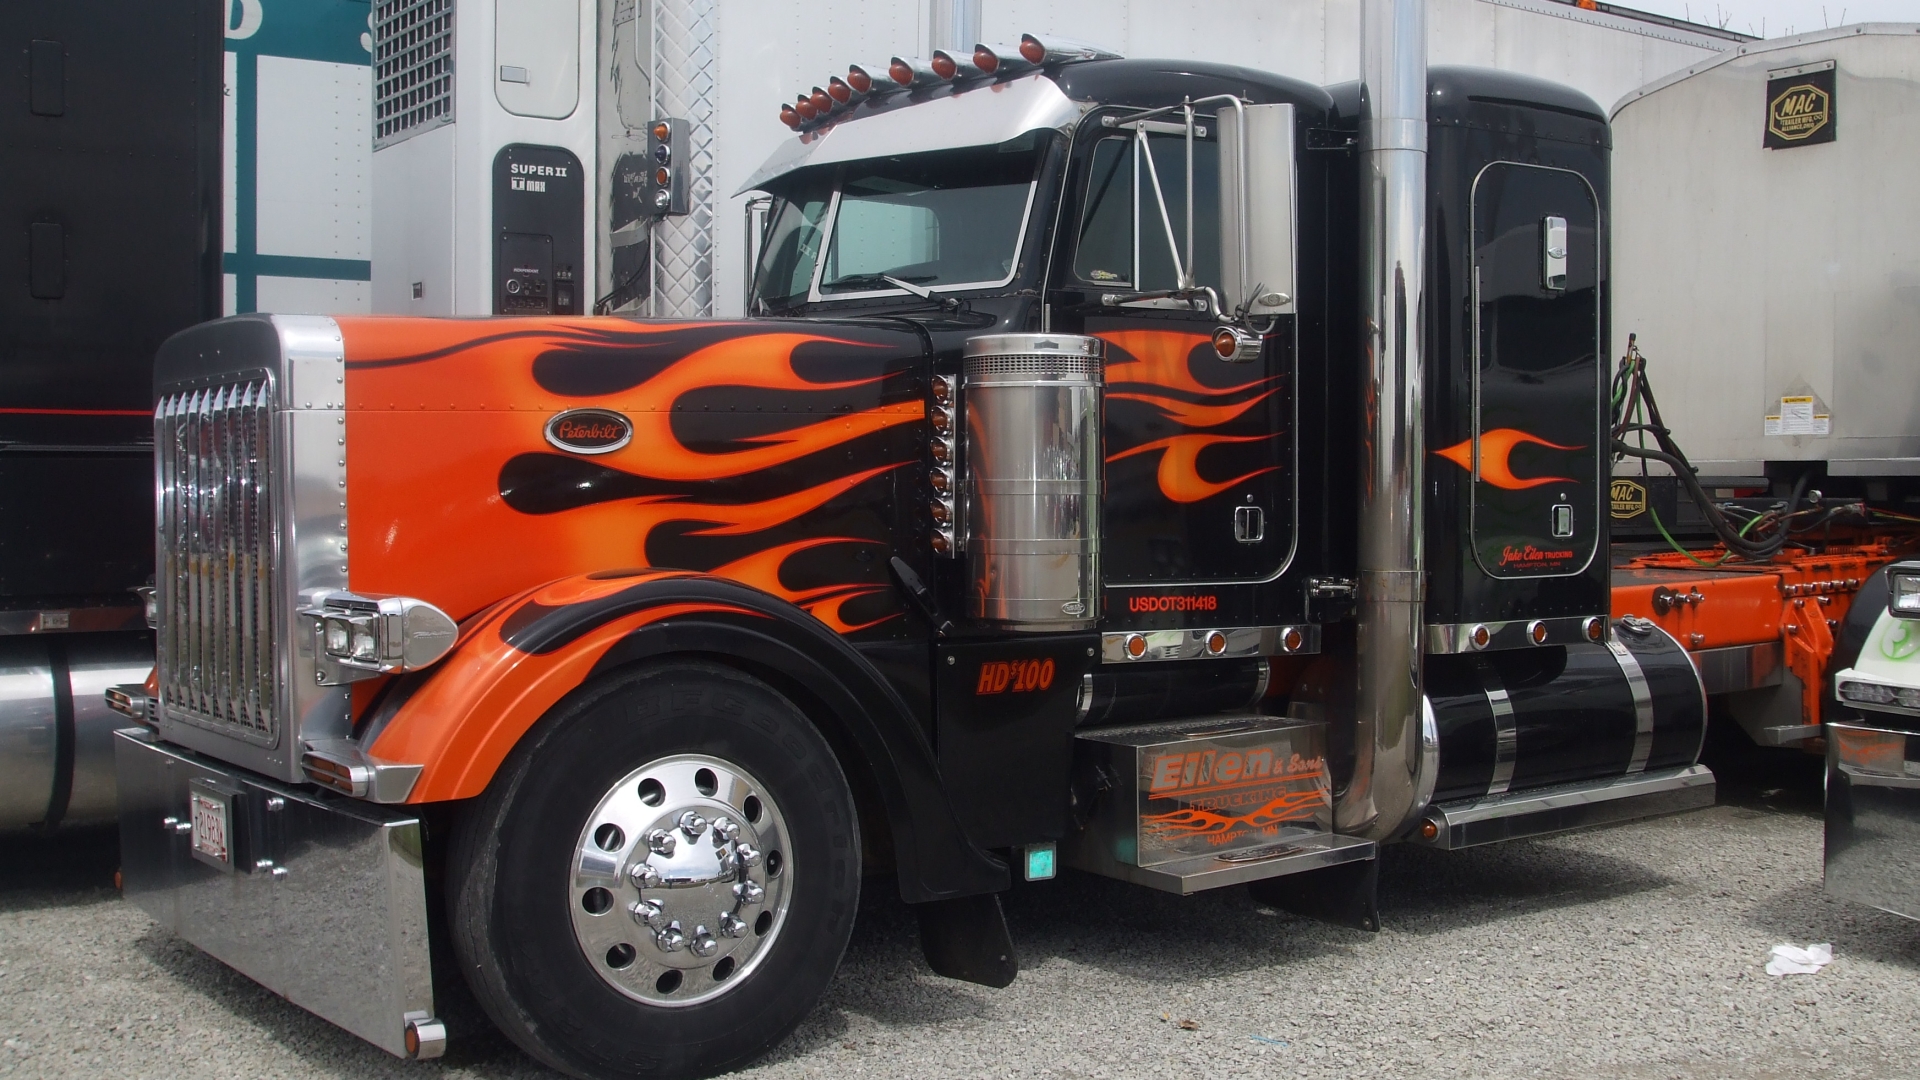 A powerful truck cruising on an open road, commanding attention with its sleek design.